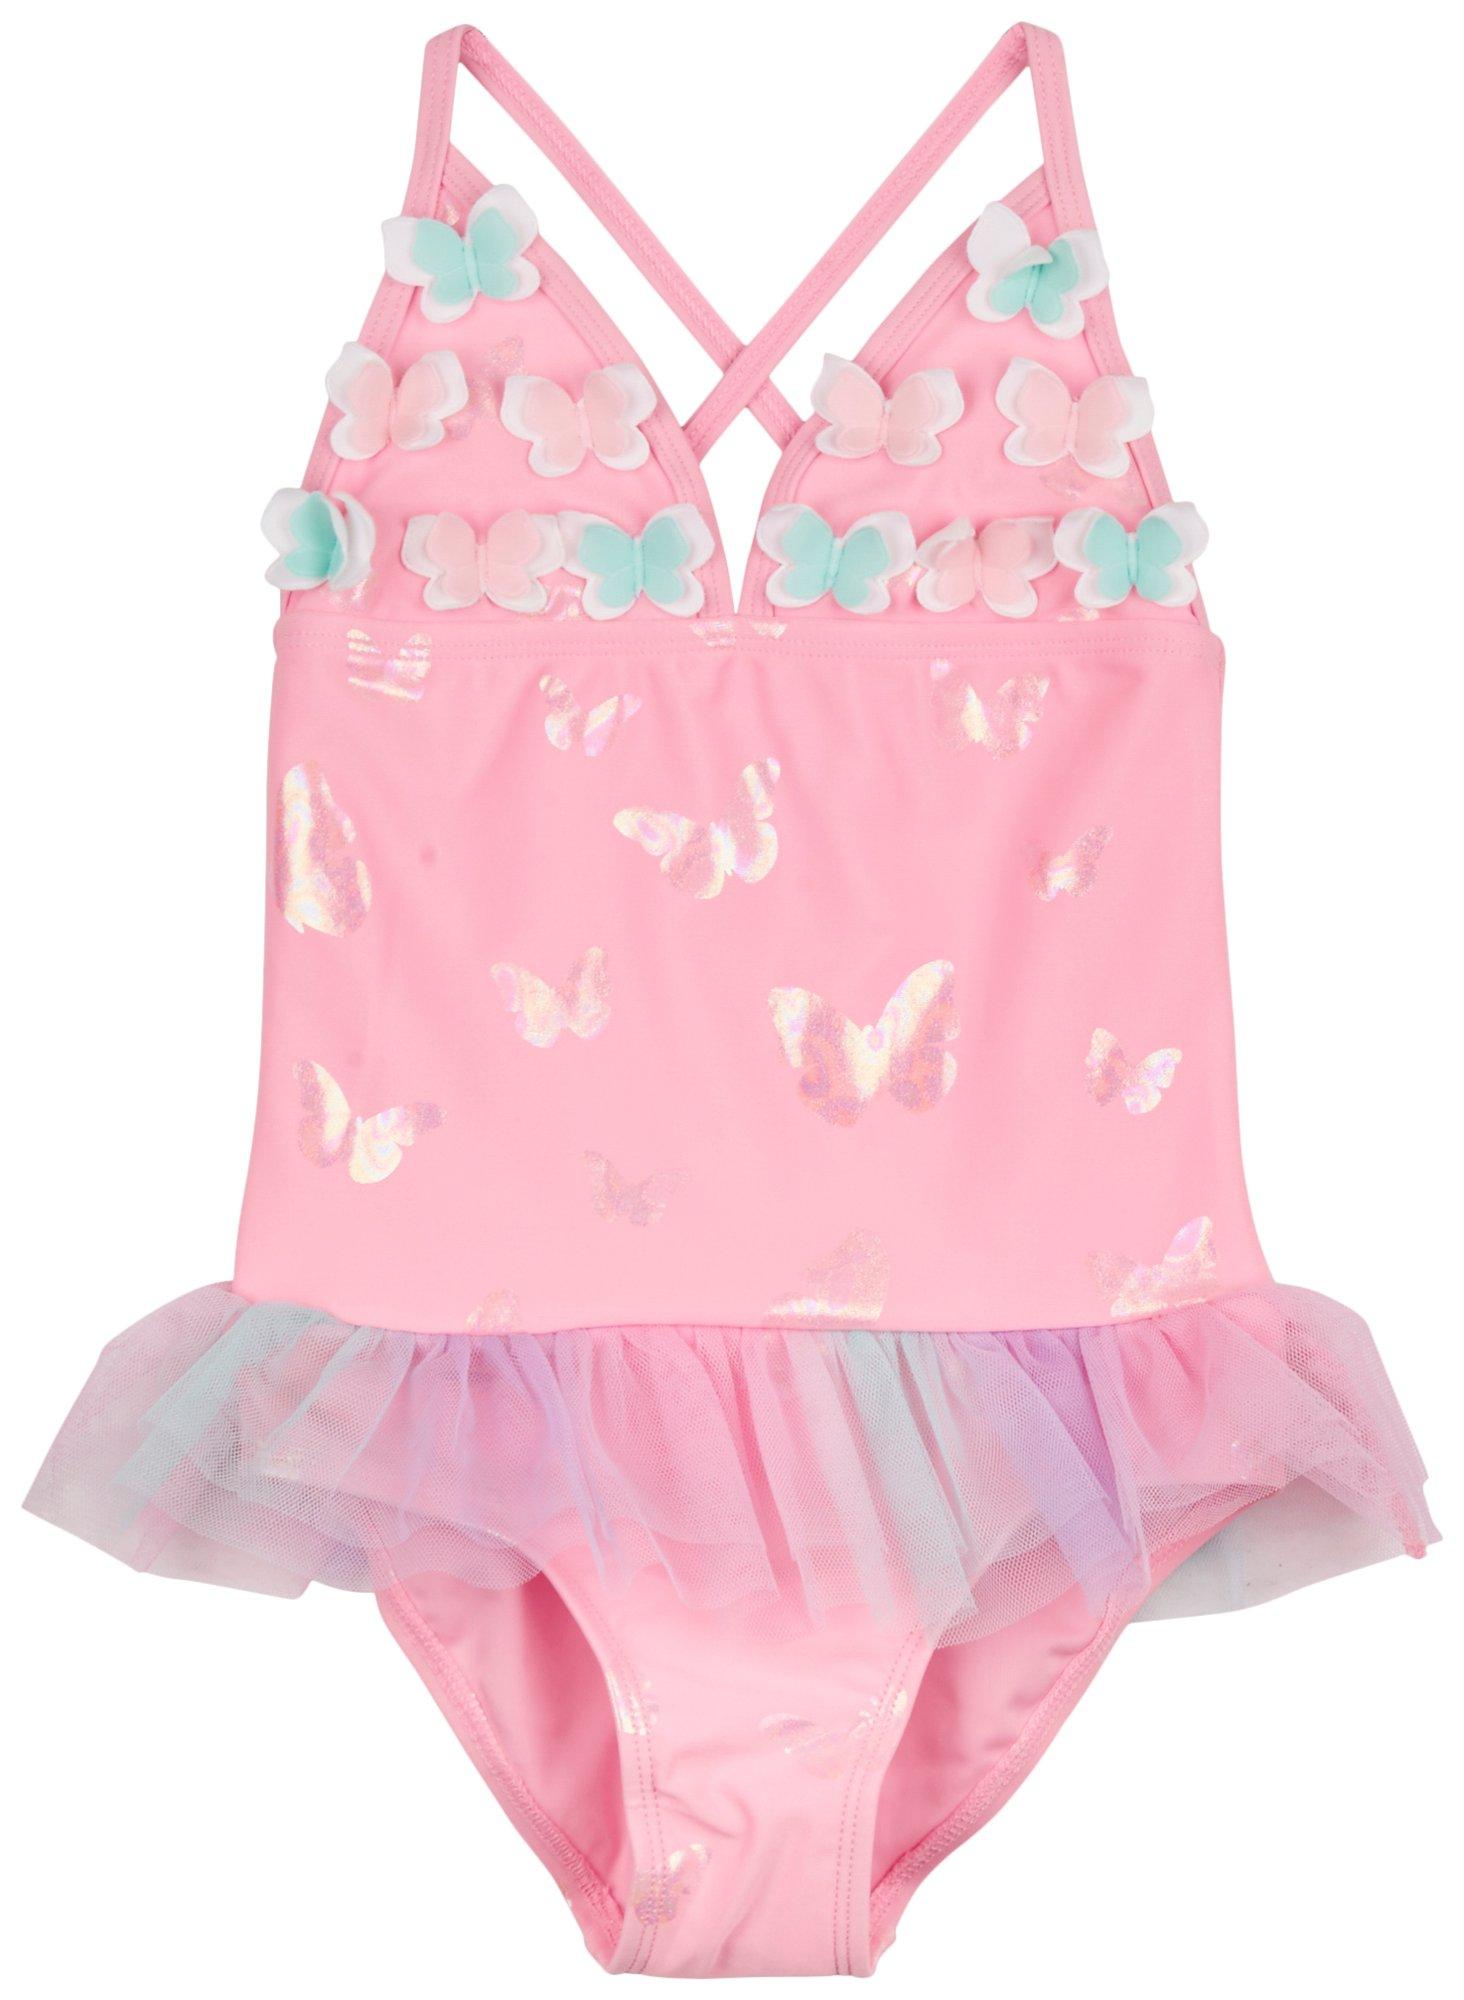 Toddler Girls One Pc. Iridescent Foil Swimsuit